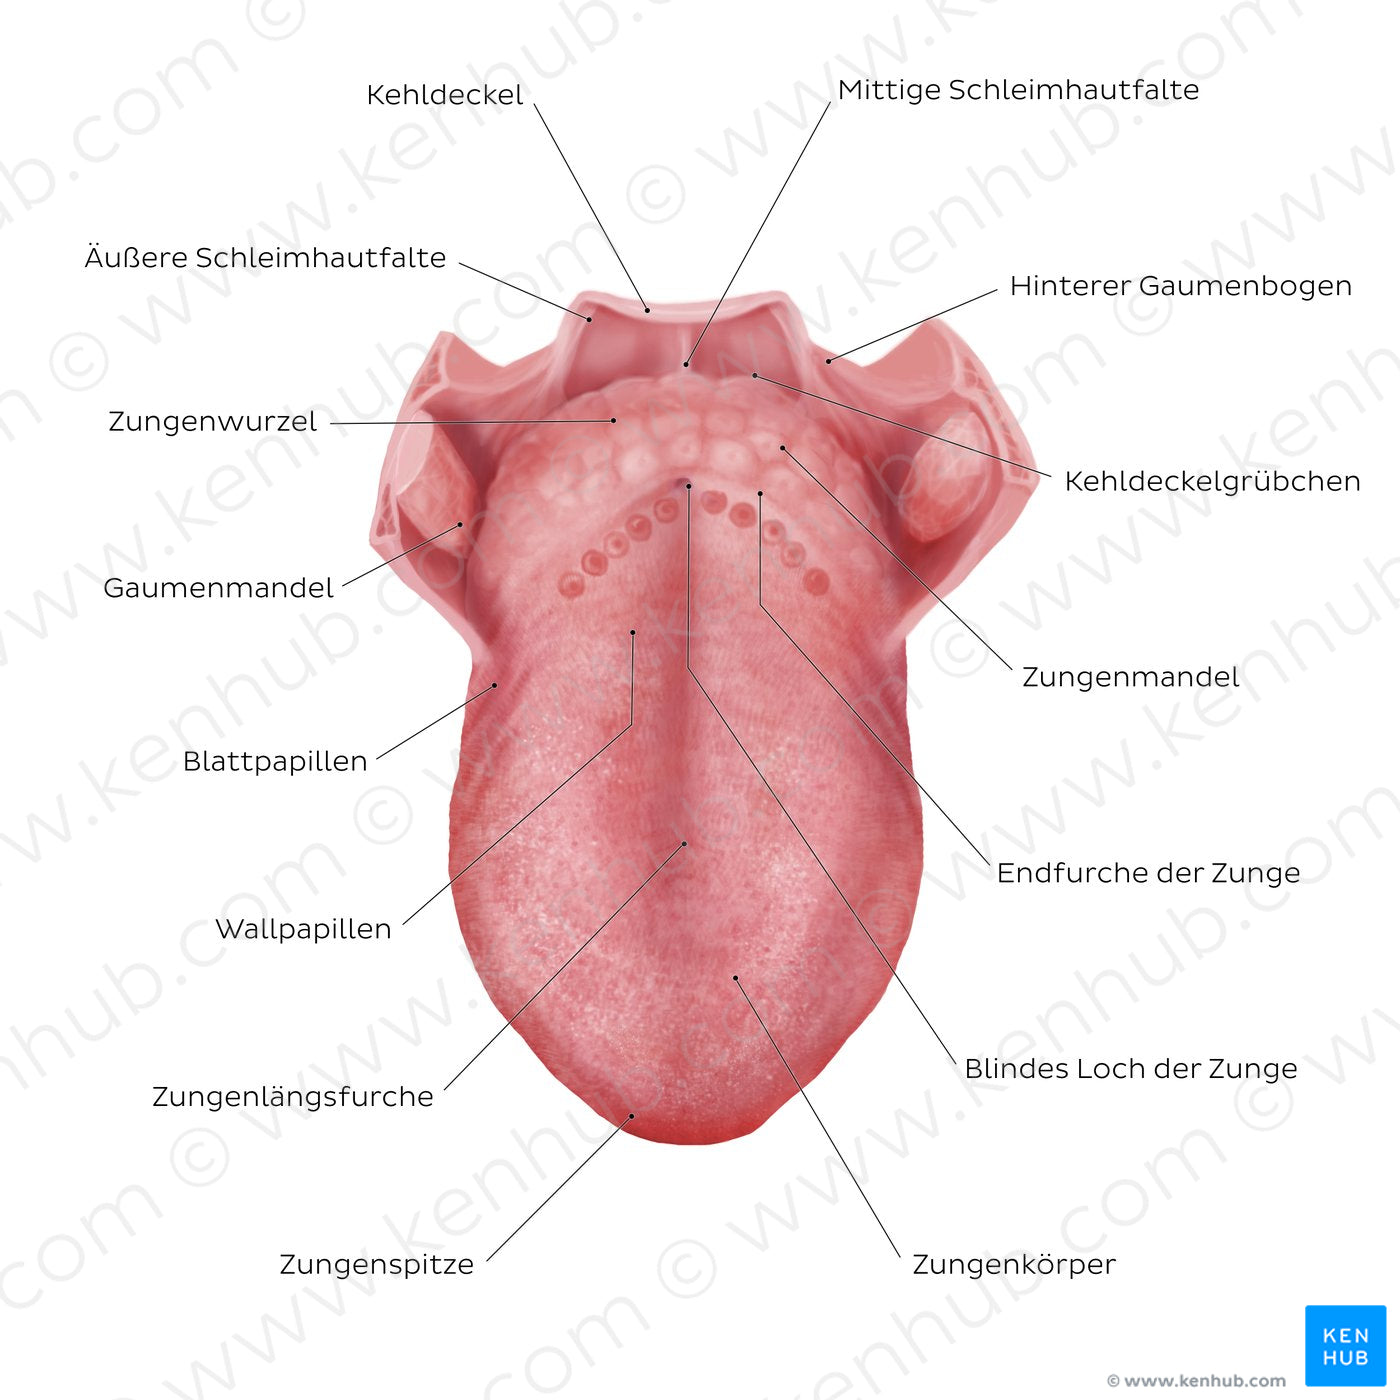 Structure of the tongue (German)